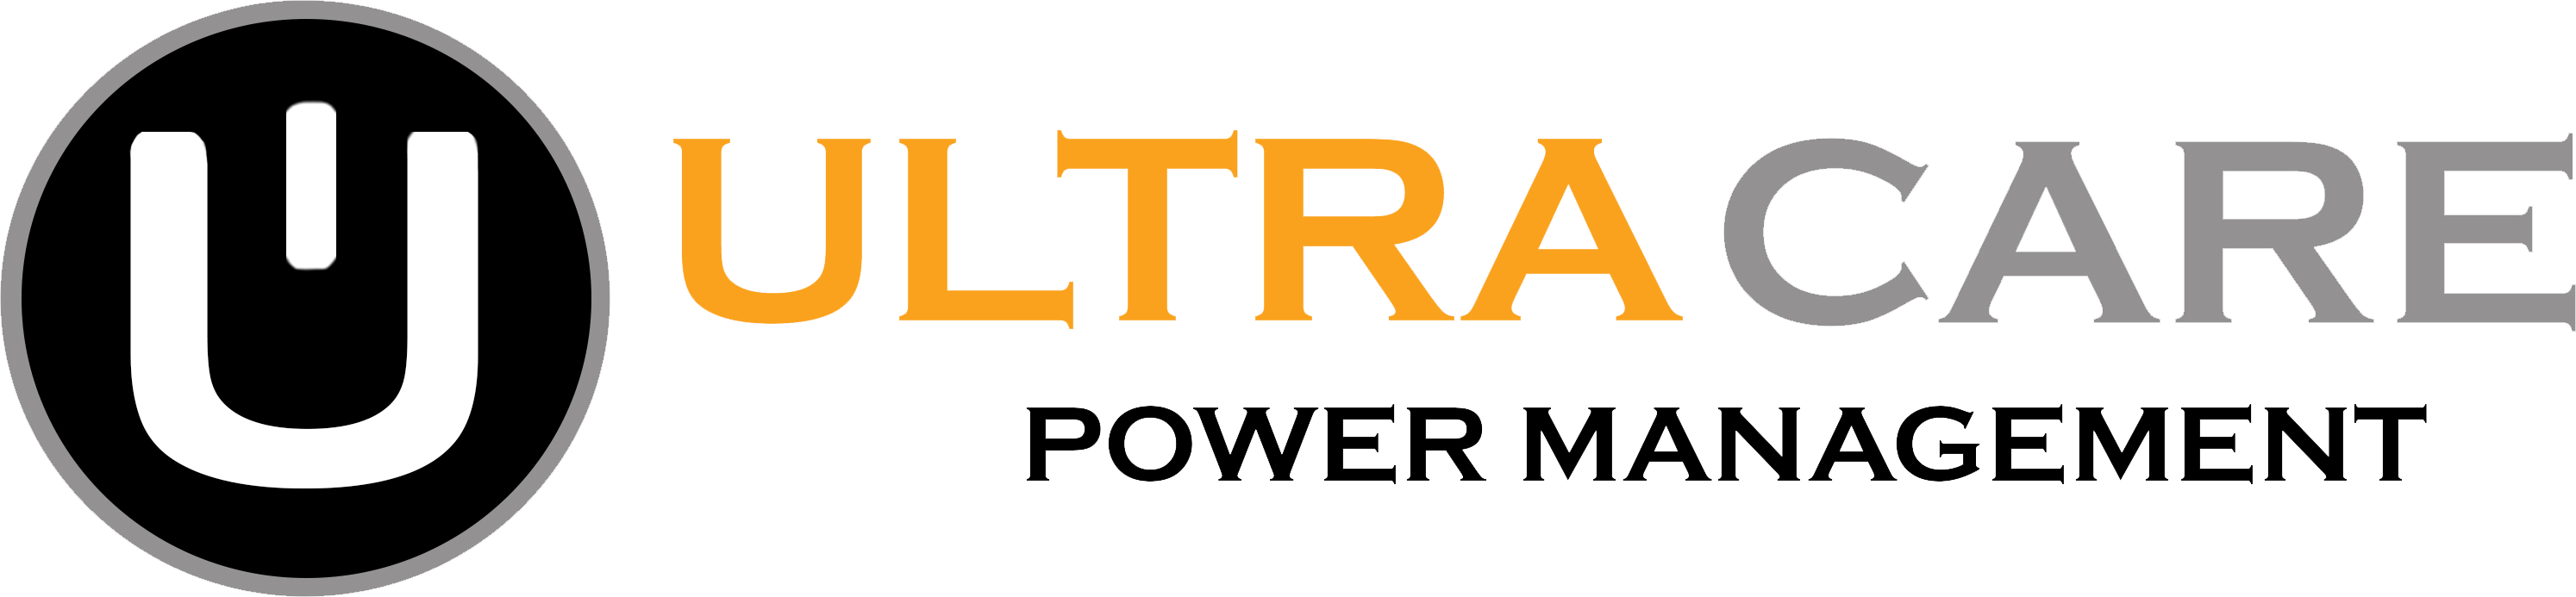 UltraCare Power Management